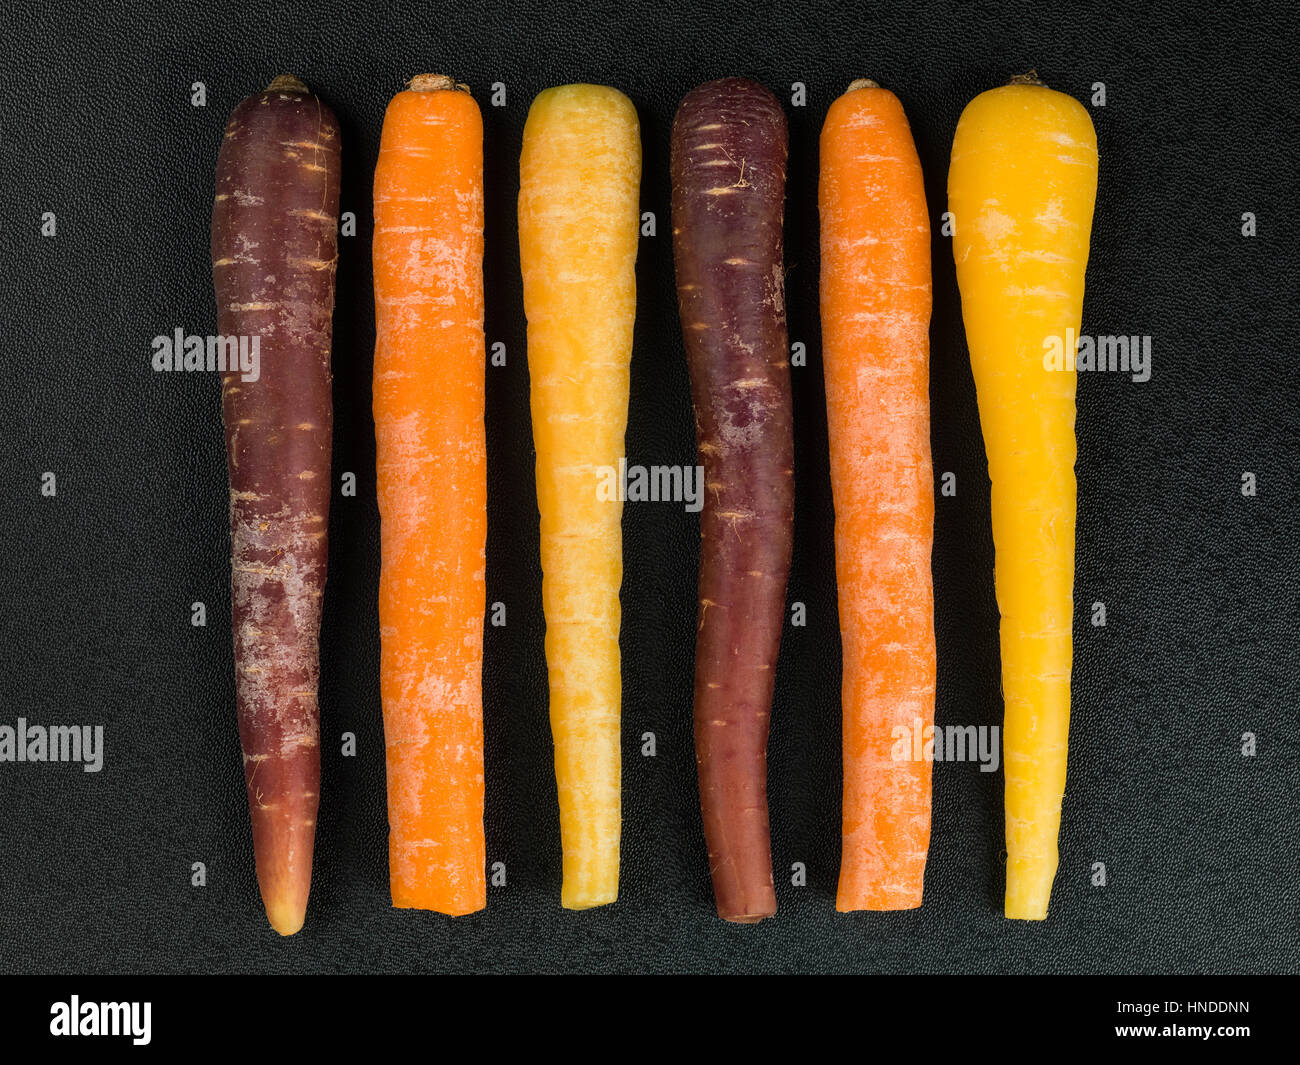 Colorful Rainbow Carrots Cooking Ingredients On A Black Background Stock Photo